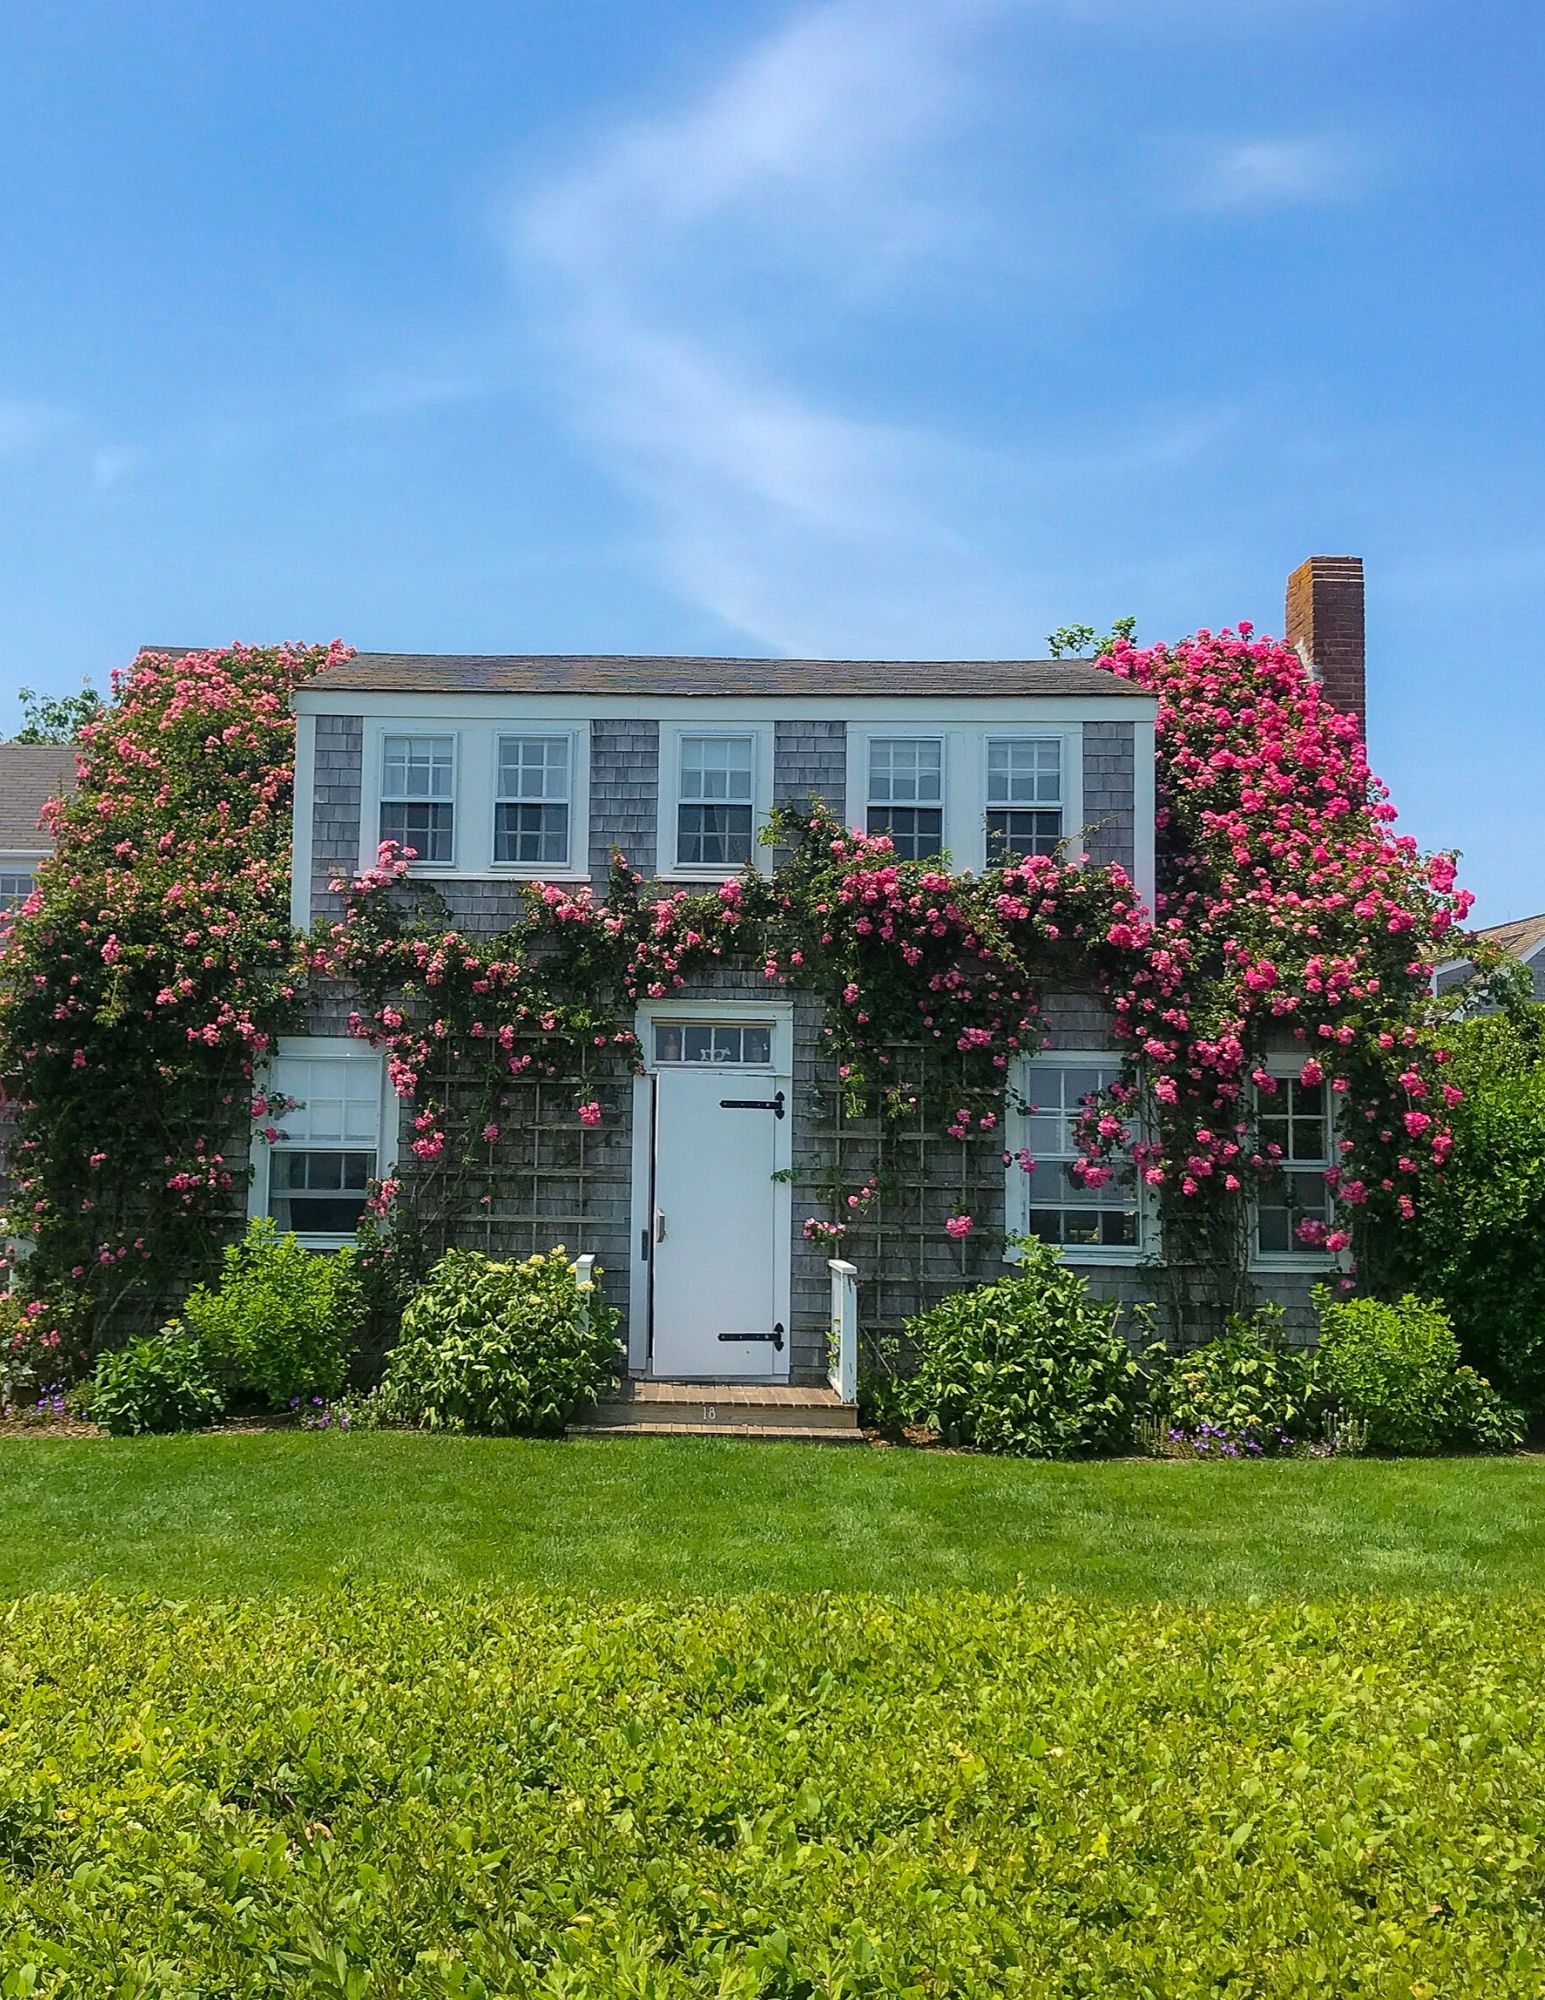 Nantucket Rose Covered Cottages in Sconset-6